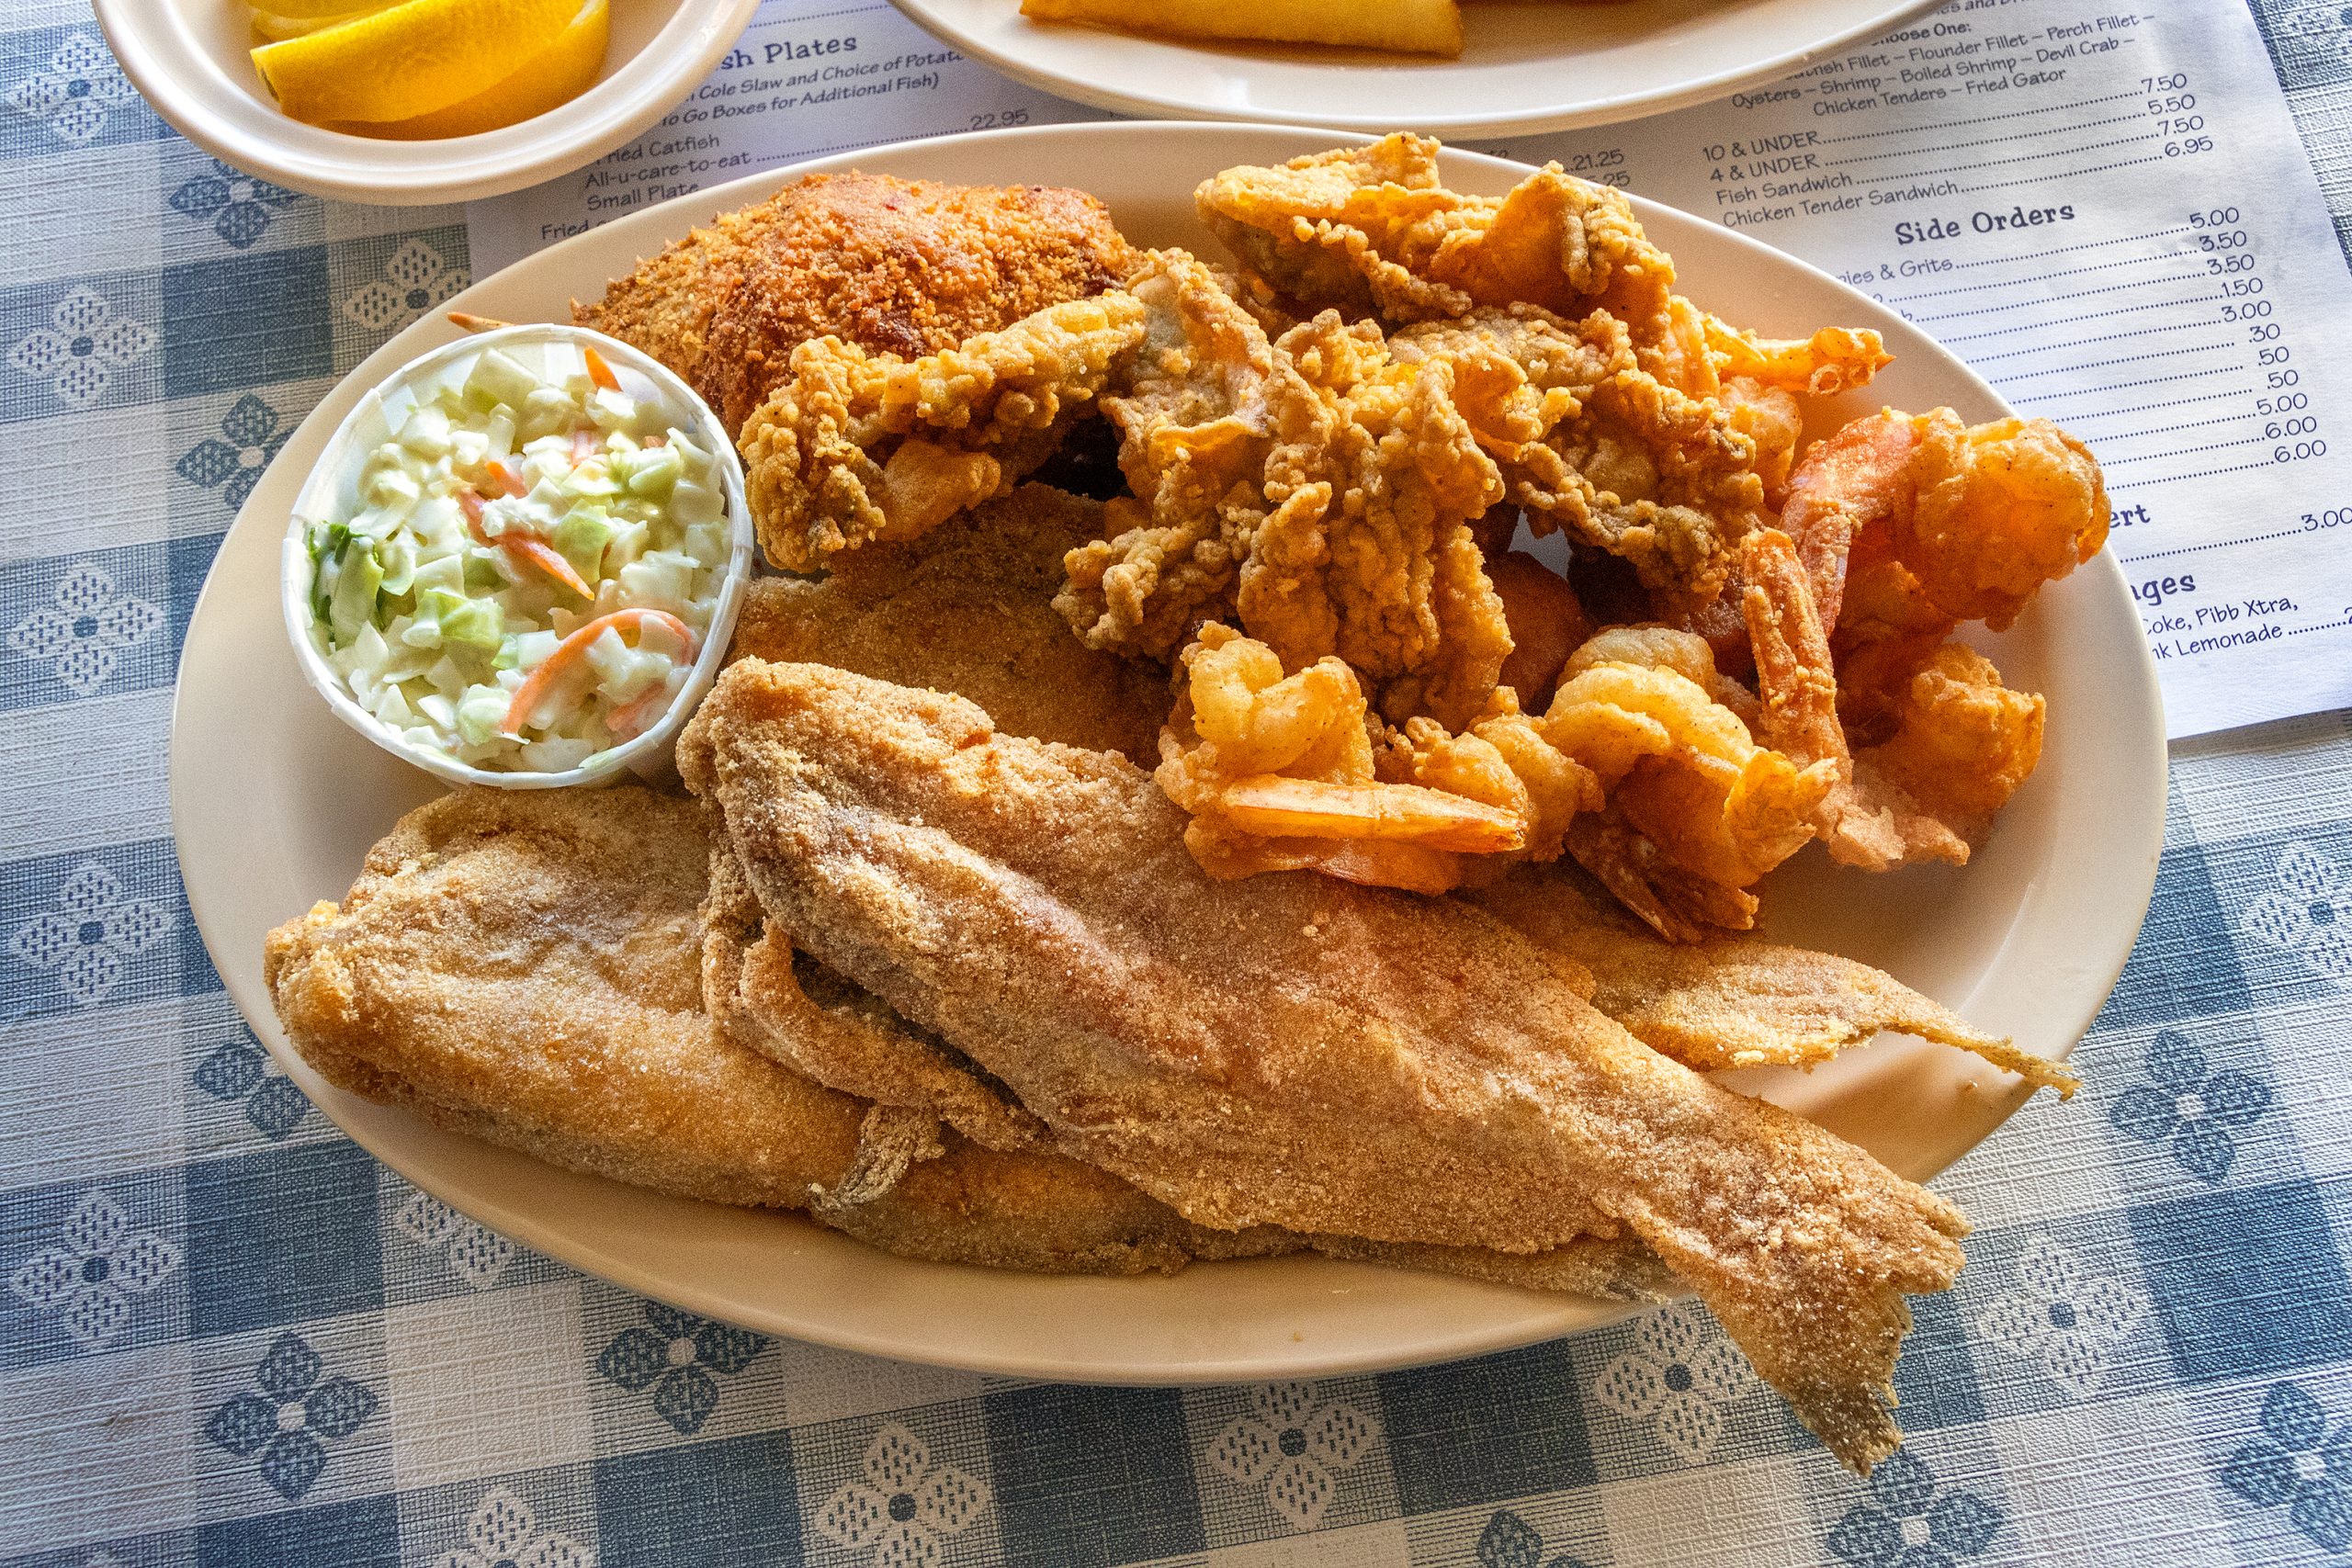 Hot tasty fish is the order of the day at fish camp restaurants. Sides consist of coleslaw, fries, and hushpuppies … all served with a smile.